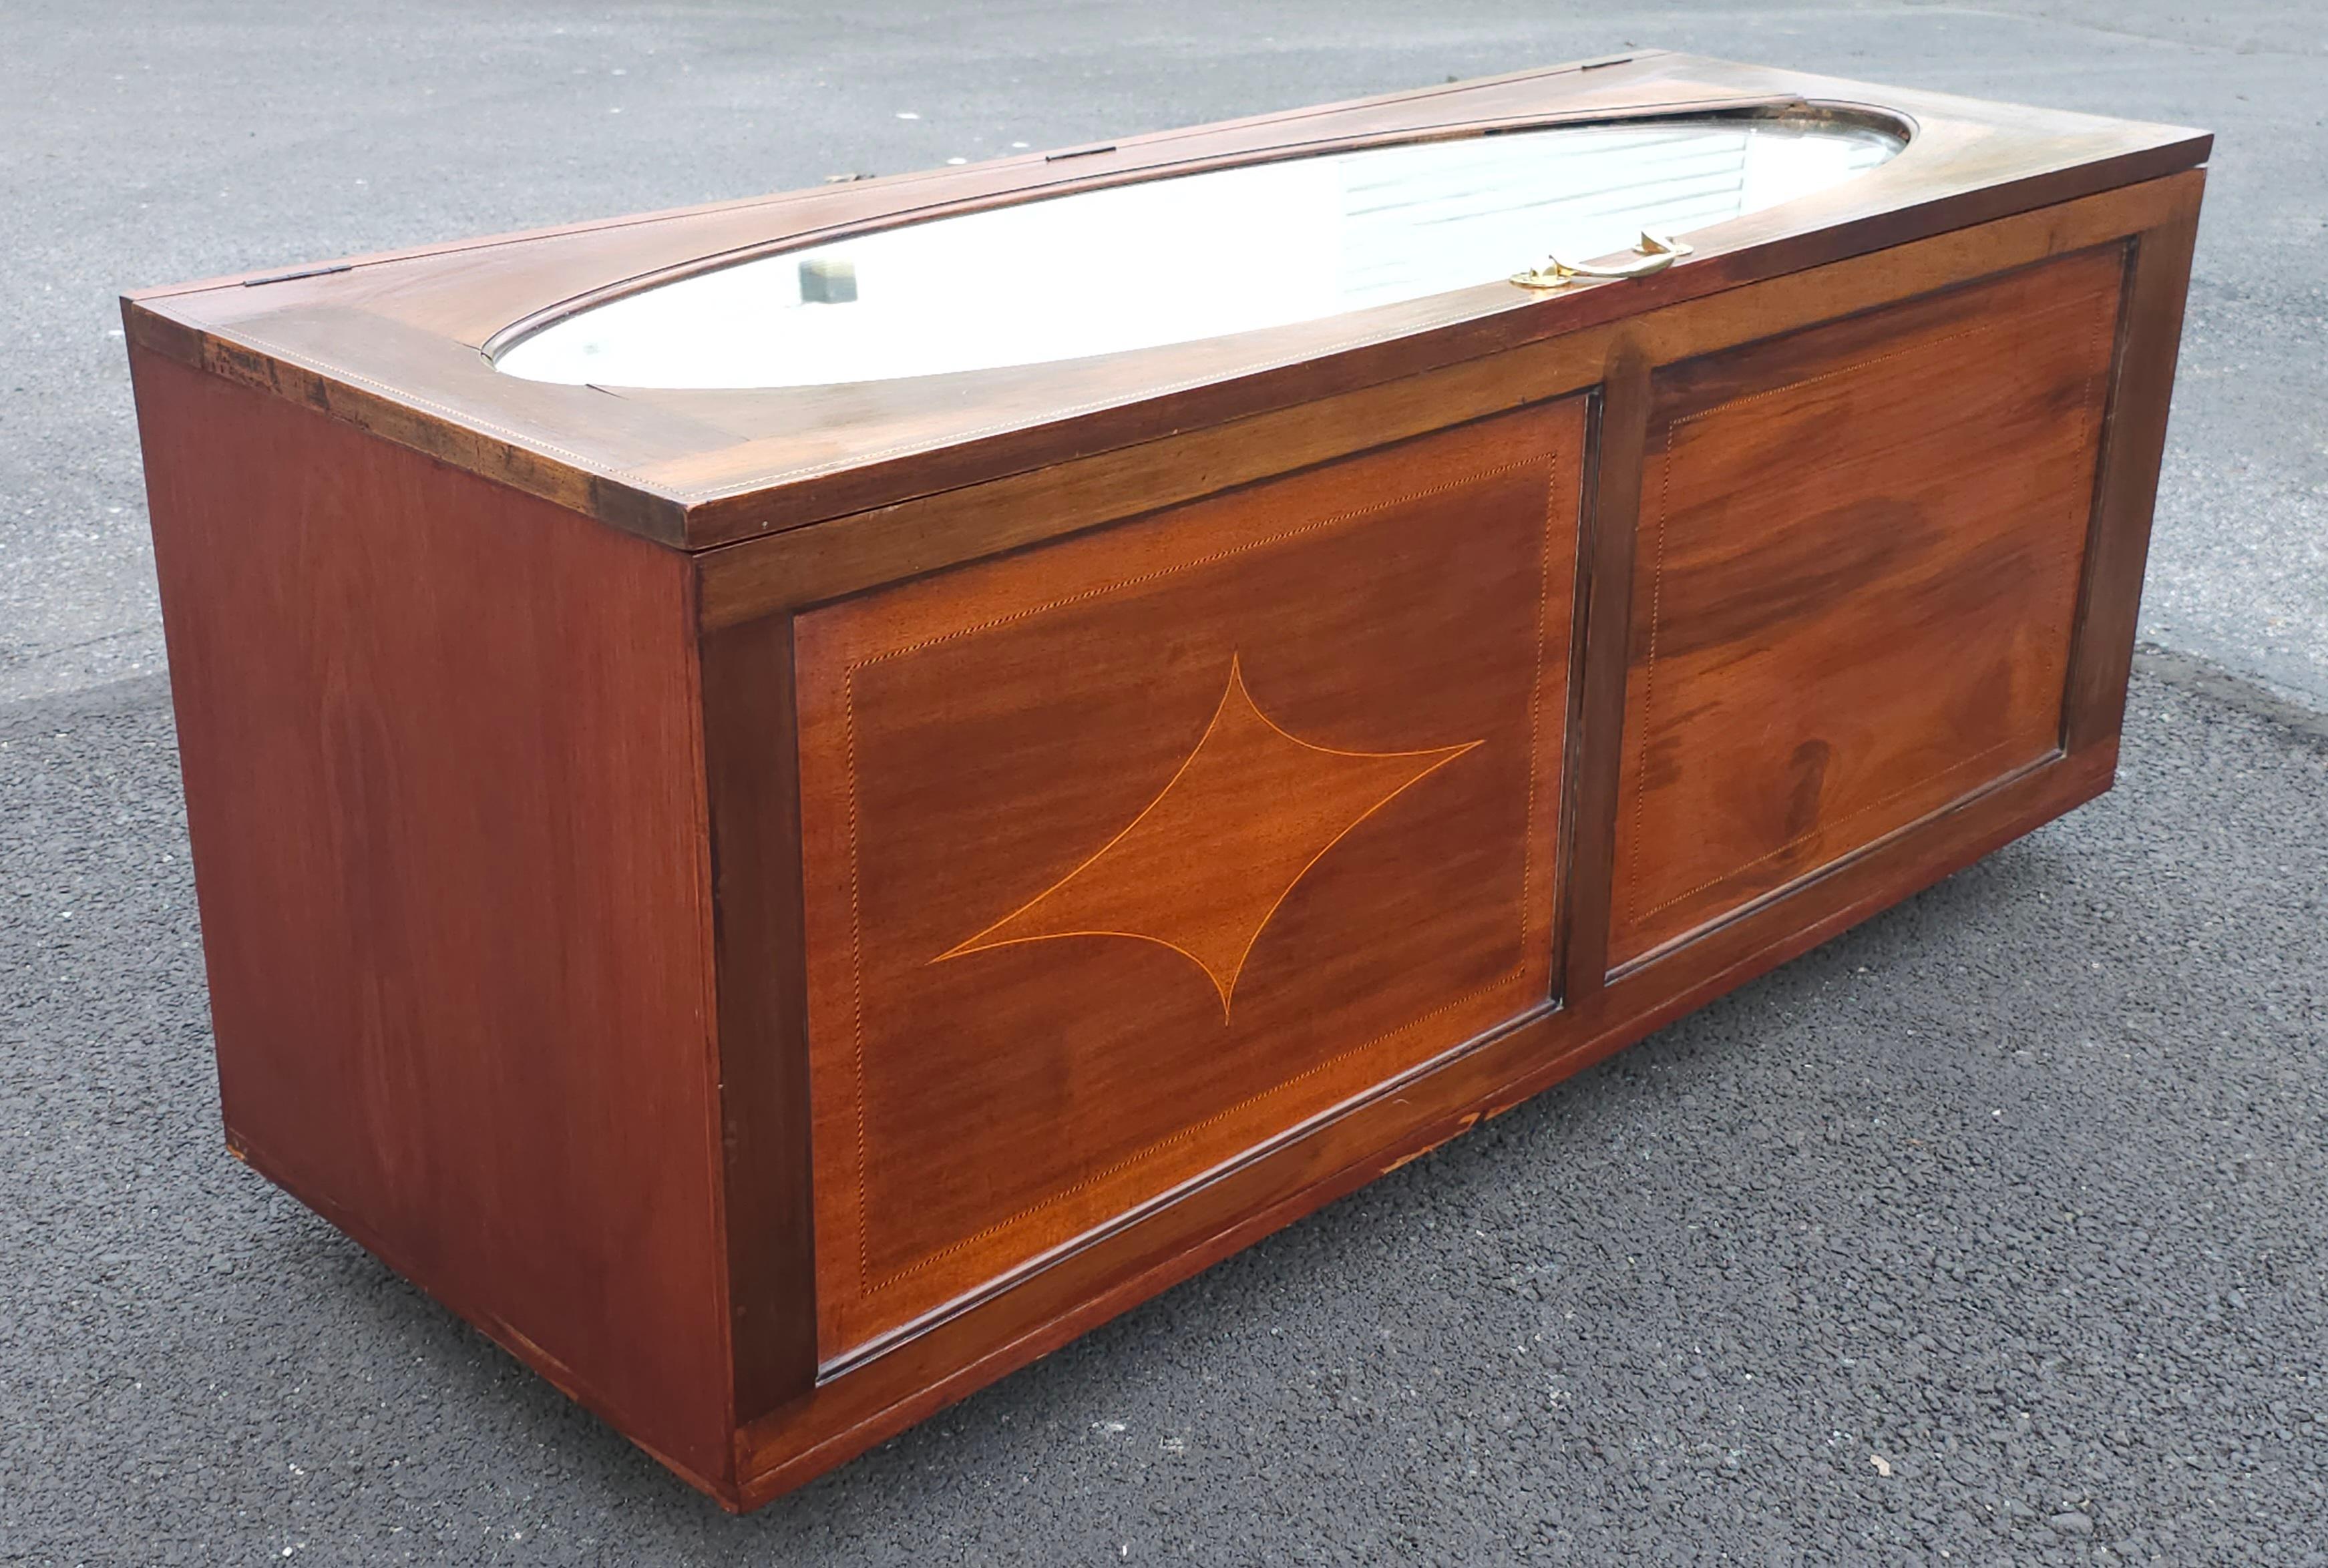 An exceptional late 19th Century Mahogany Inlaid and Mirrored Top Blanket Chest on Wheels. Measures 54